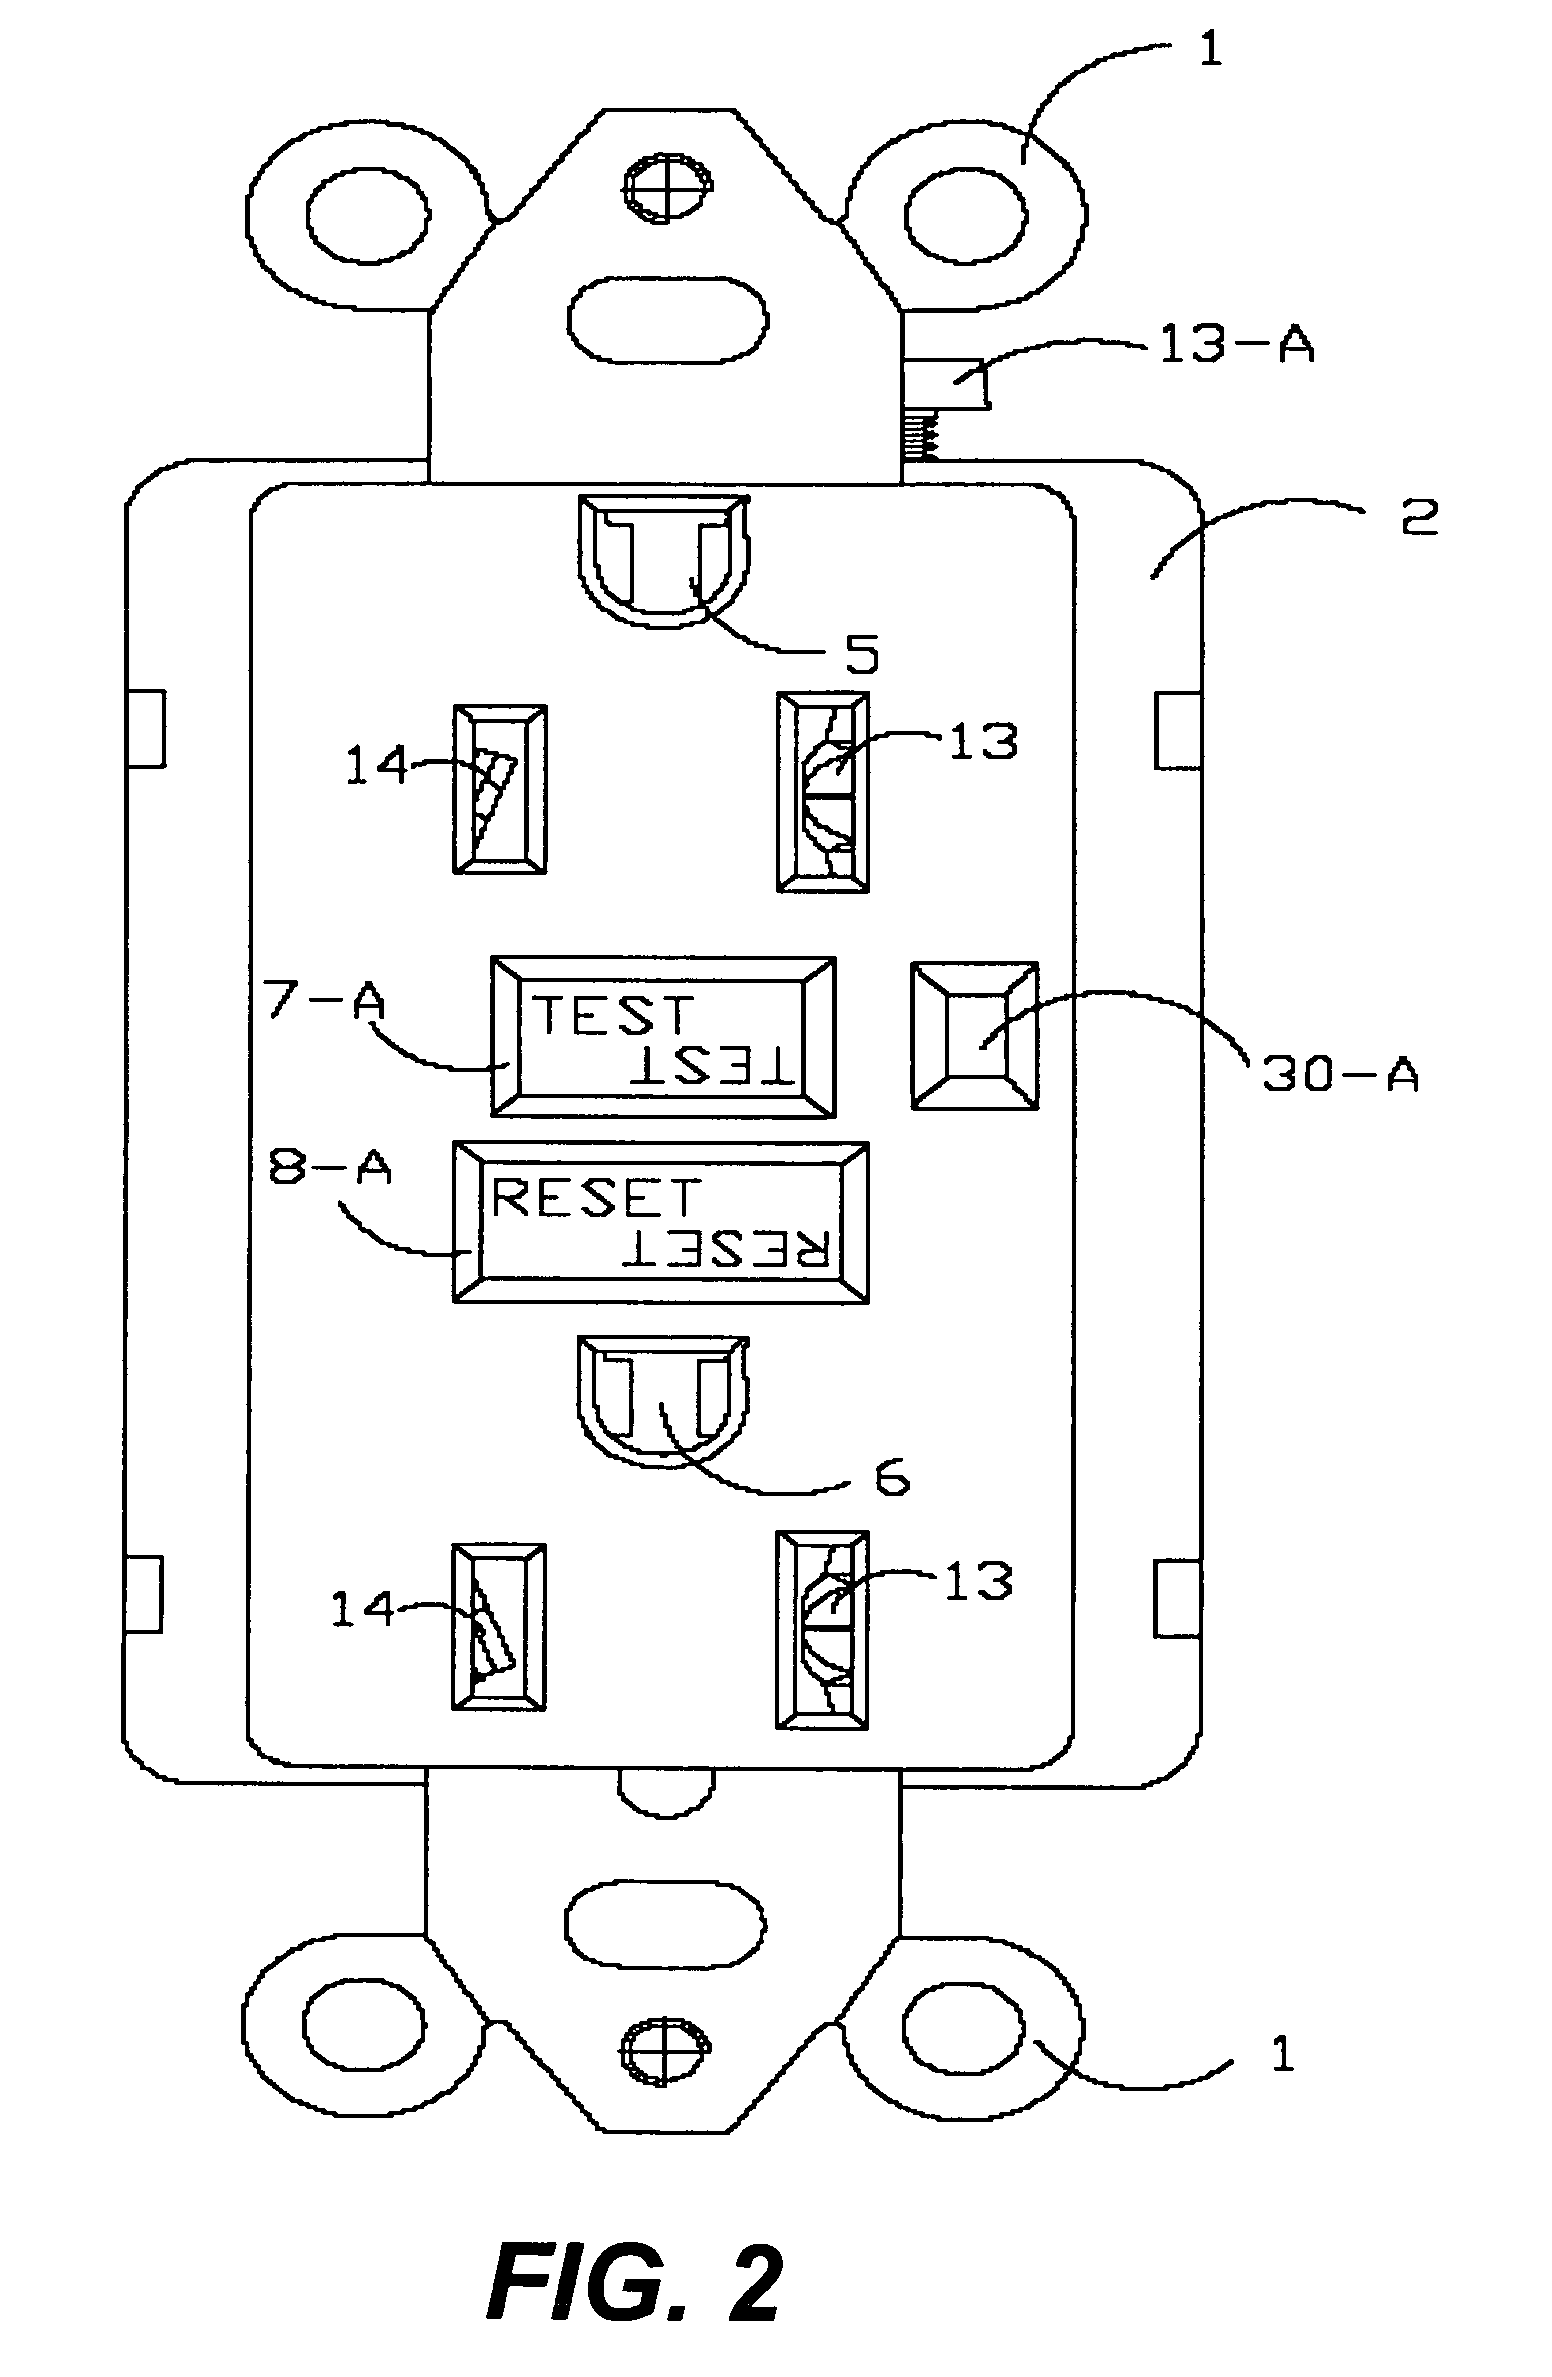 Circuits for circuit interrupting devices having automatic end of life testing function